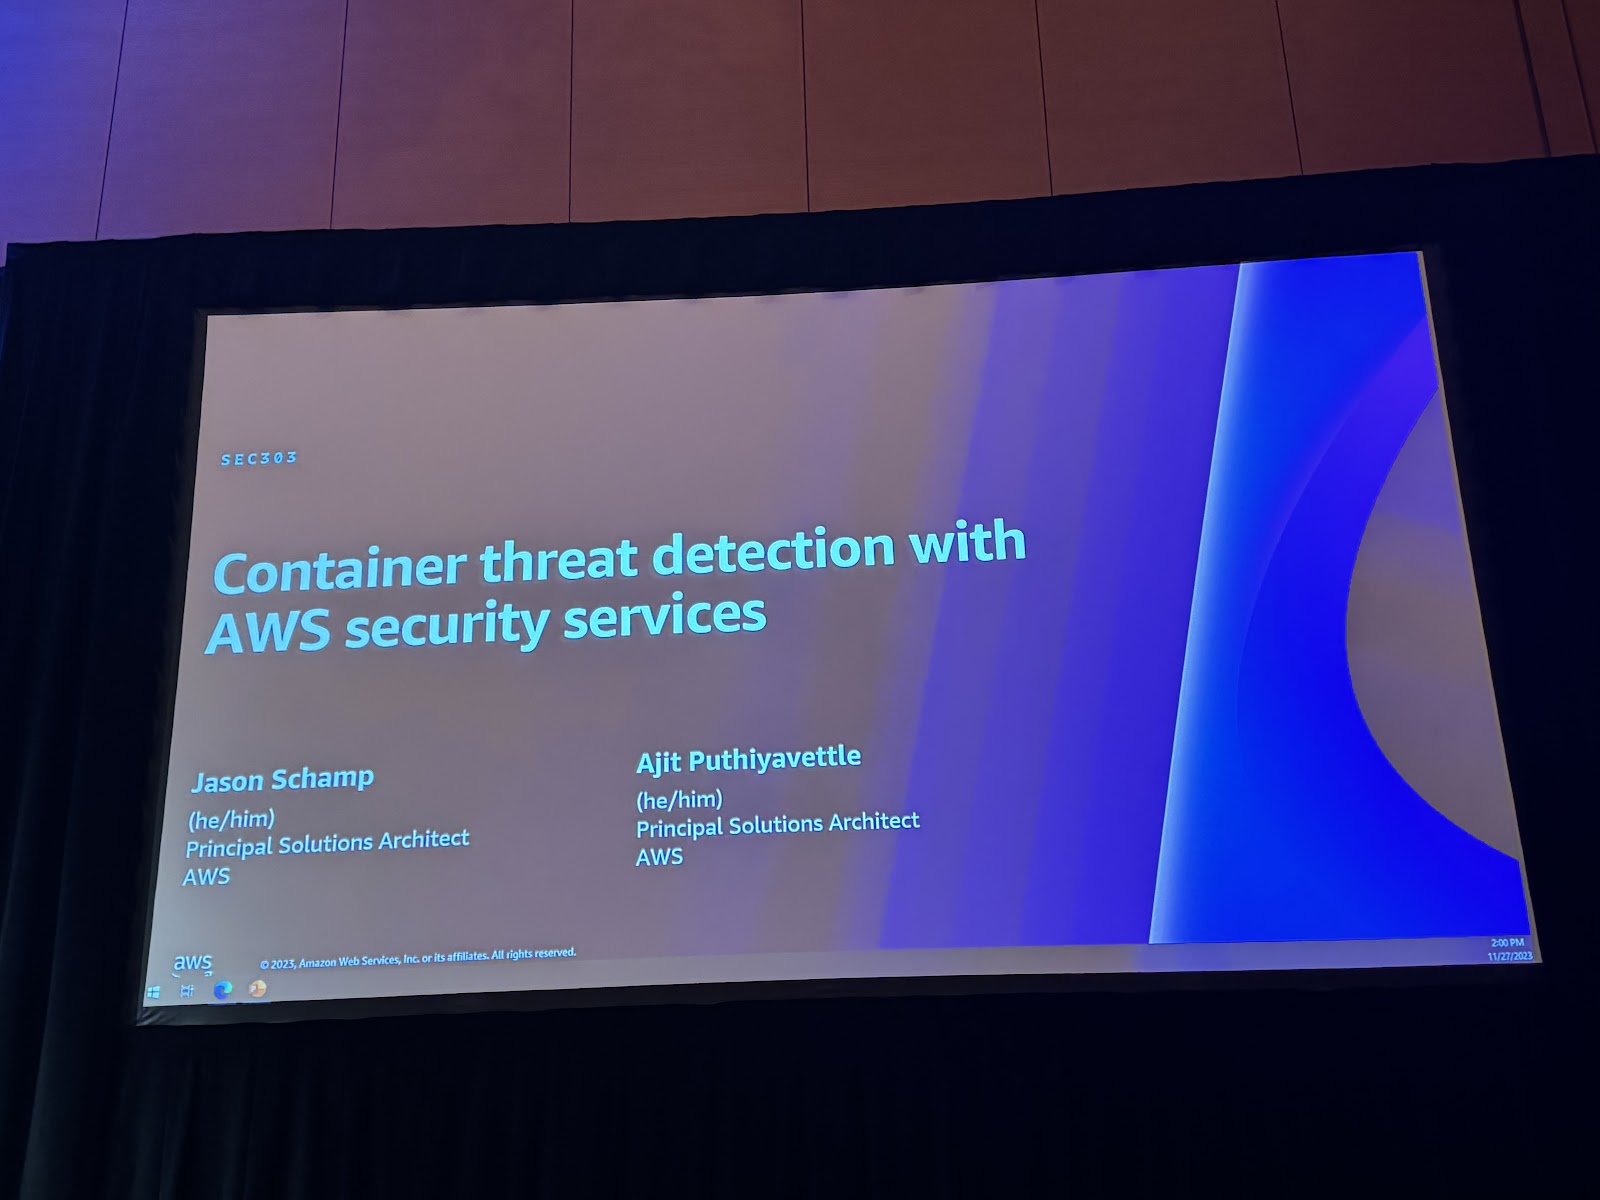 Container threat detection with AWS security services